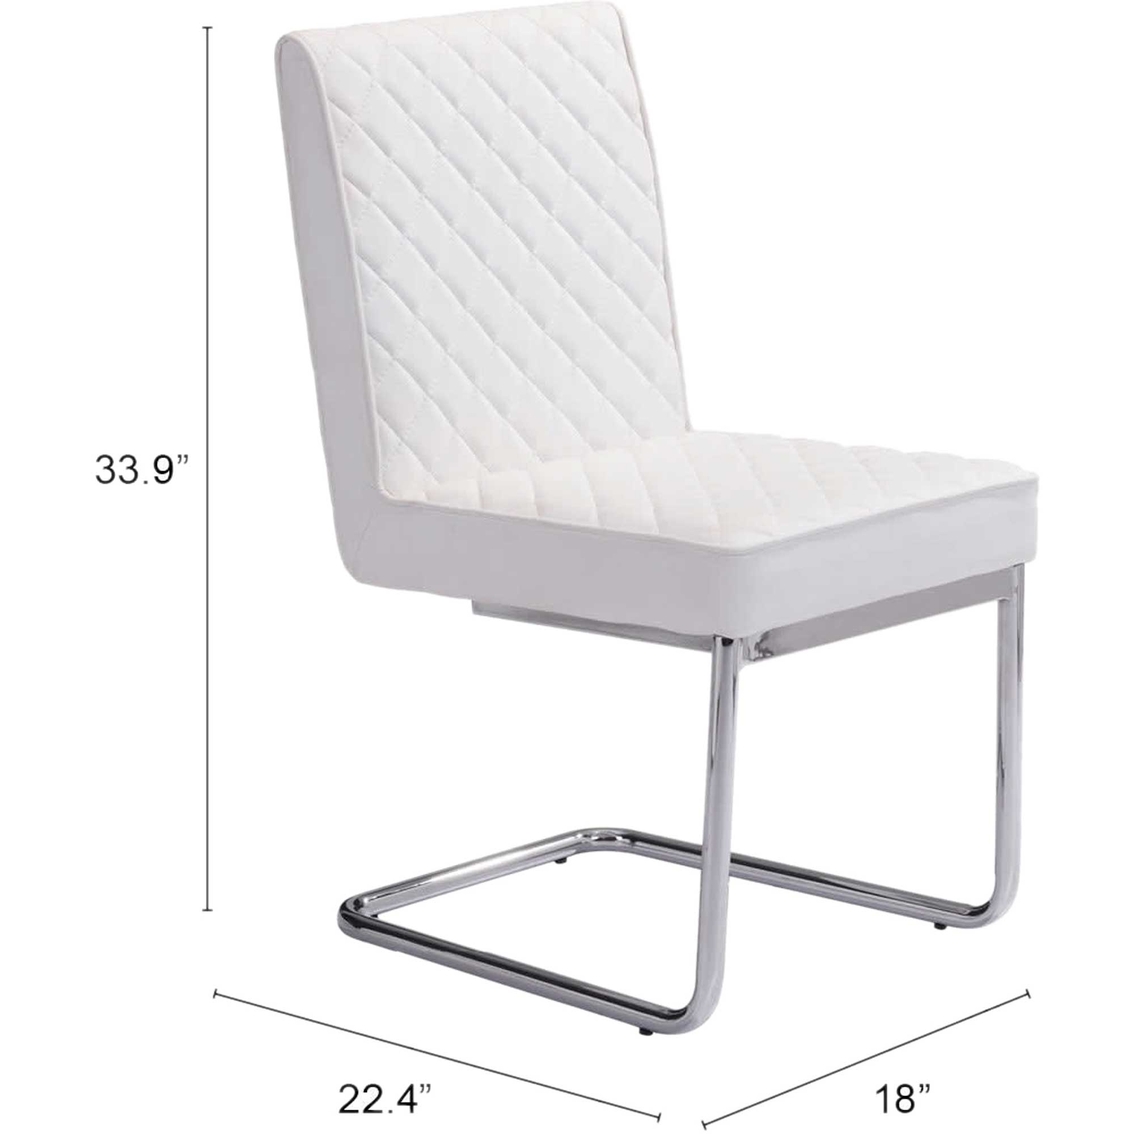 Zuo Modern Quilt Armless Dining Chair 2 Pk. - Image 8 of 8